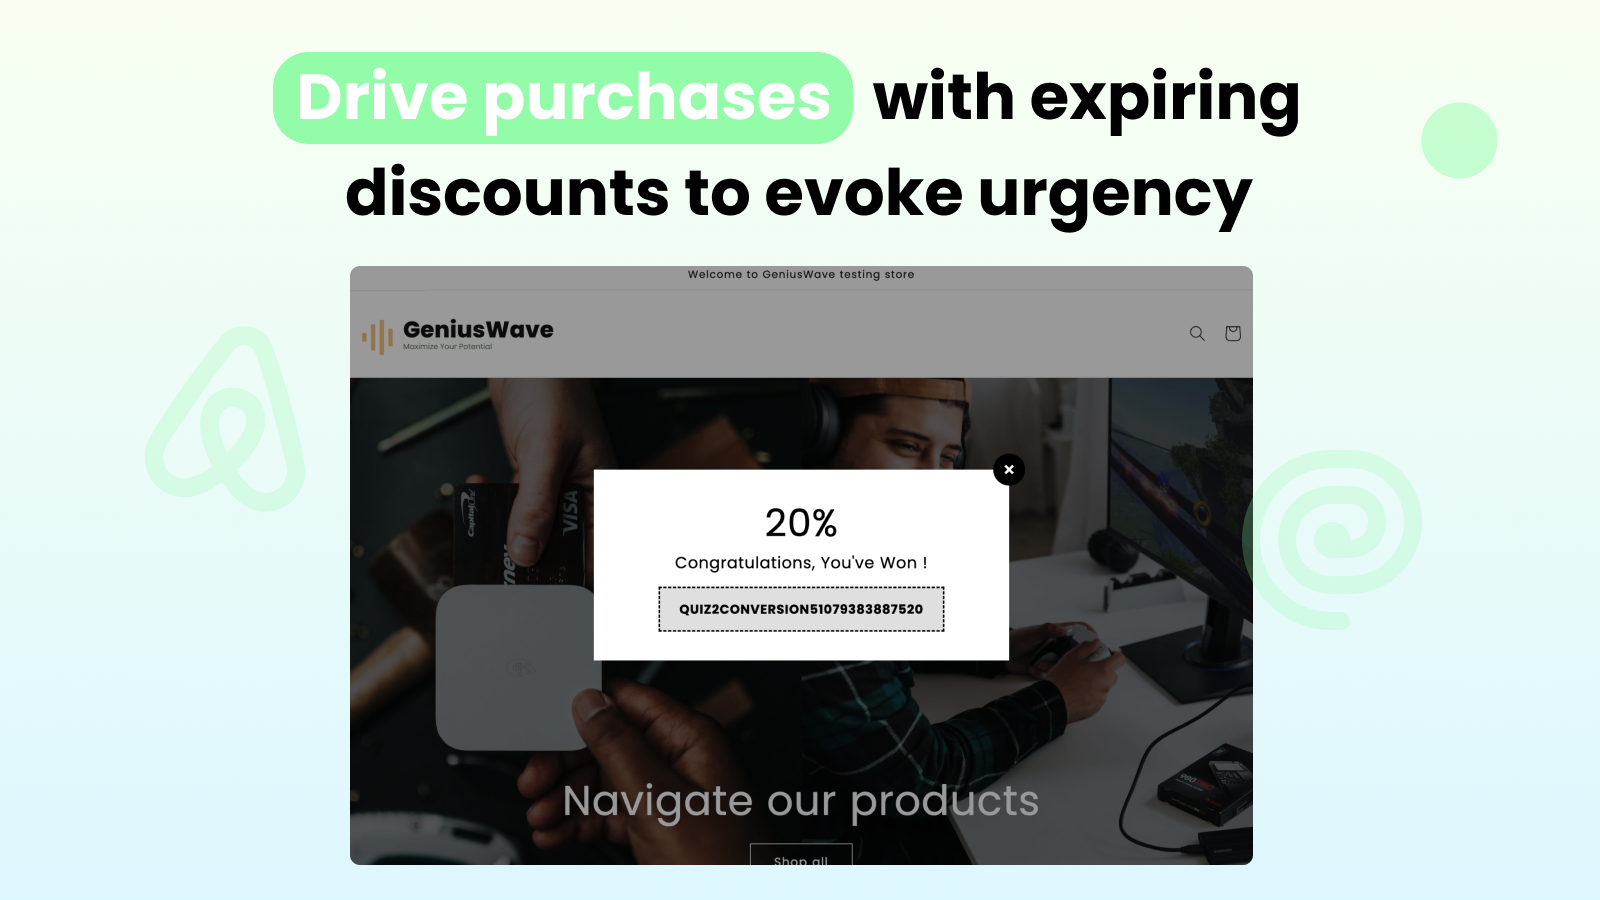 Drive purchases with time sensitive discounts to evoke urgency